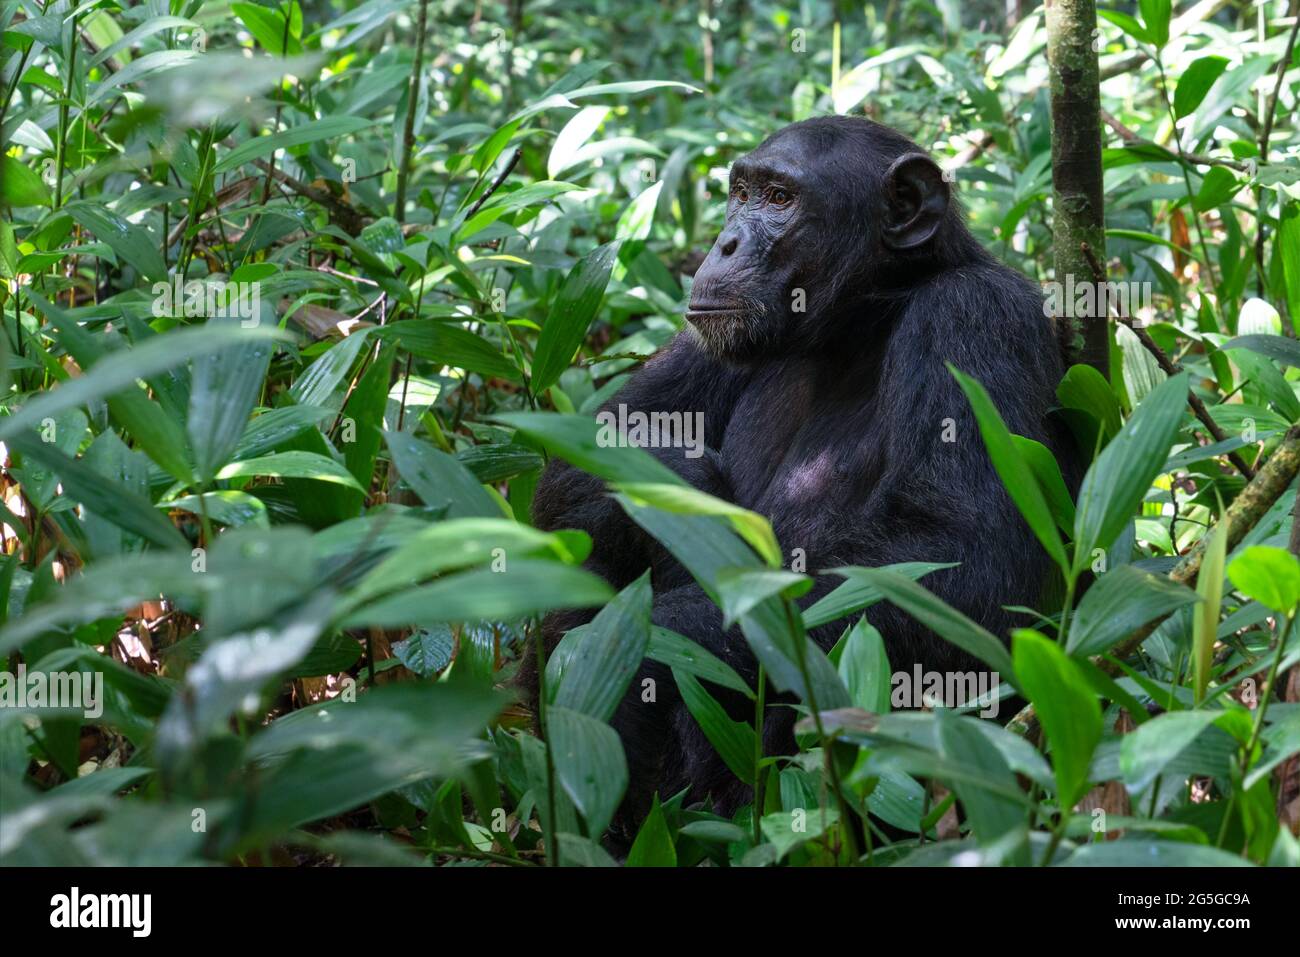 Close up image of chimpanzee within the forest of the Kibale National Park, Uganda, Africa Stock Photo